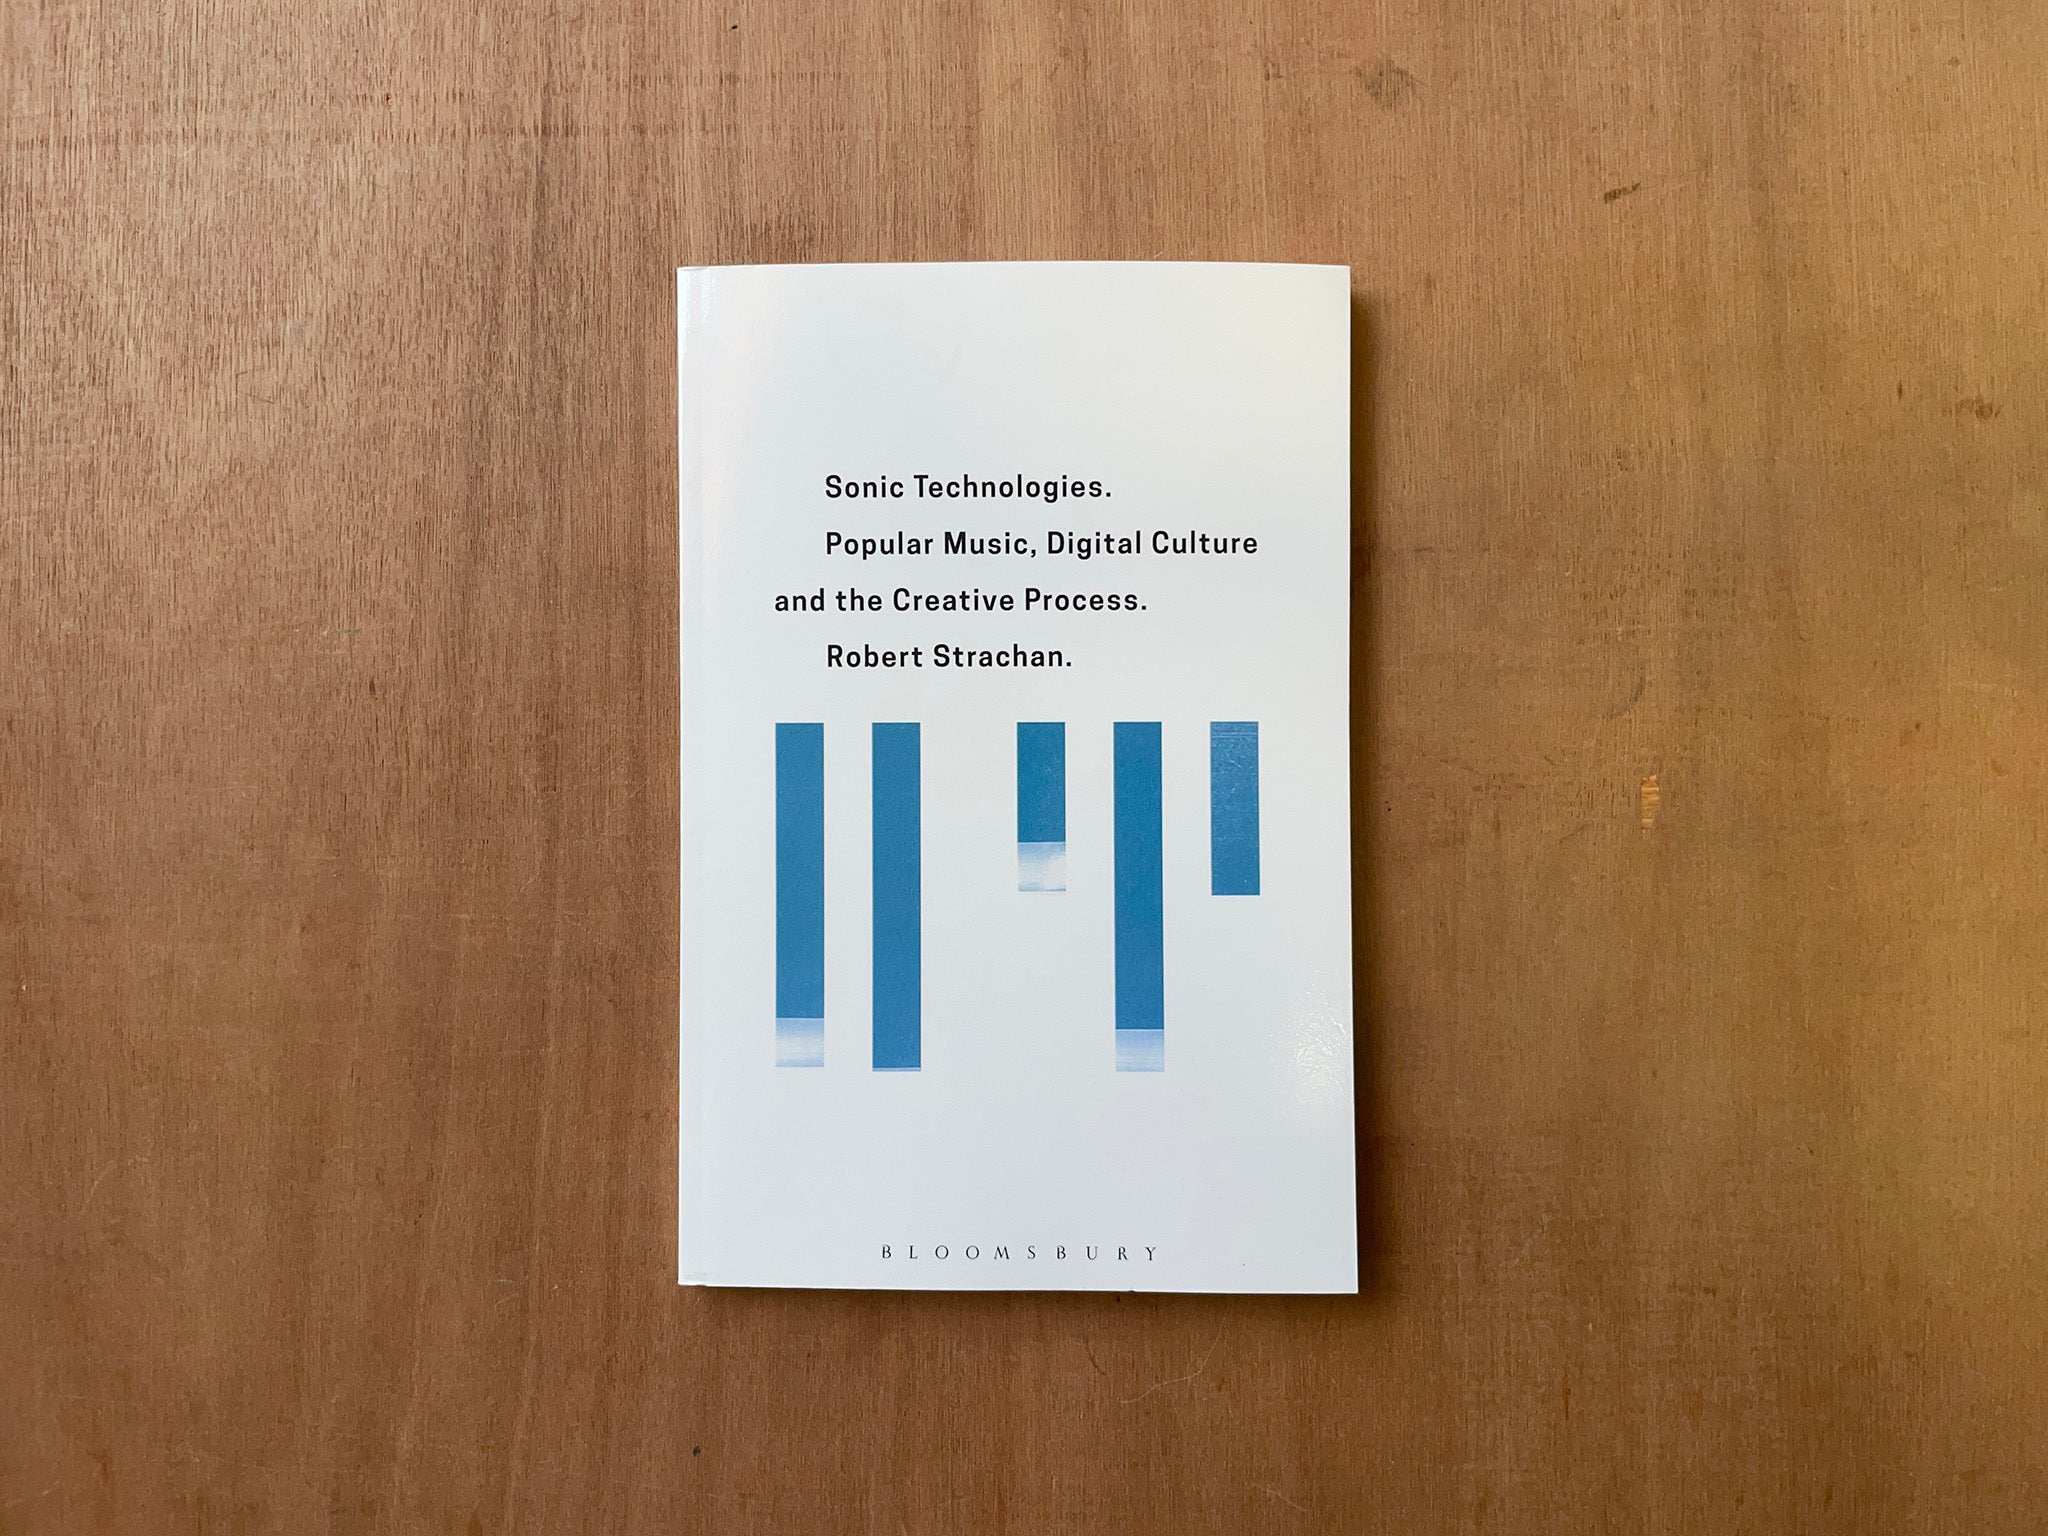 SONIC TECHNOLOGIES: POPULAR MUSIC, DIGITAL CULTURE AND THE CREATIVE PROCESS by Robert Strachan